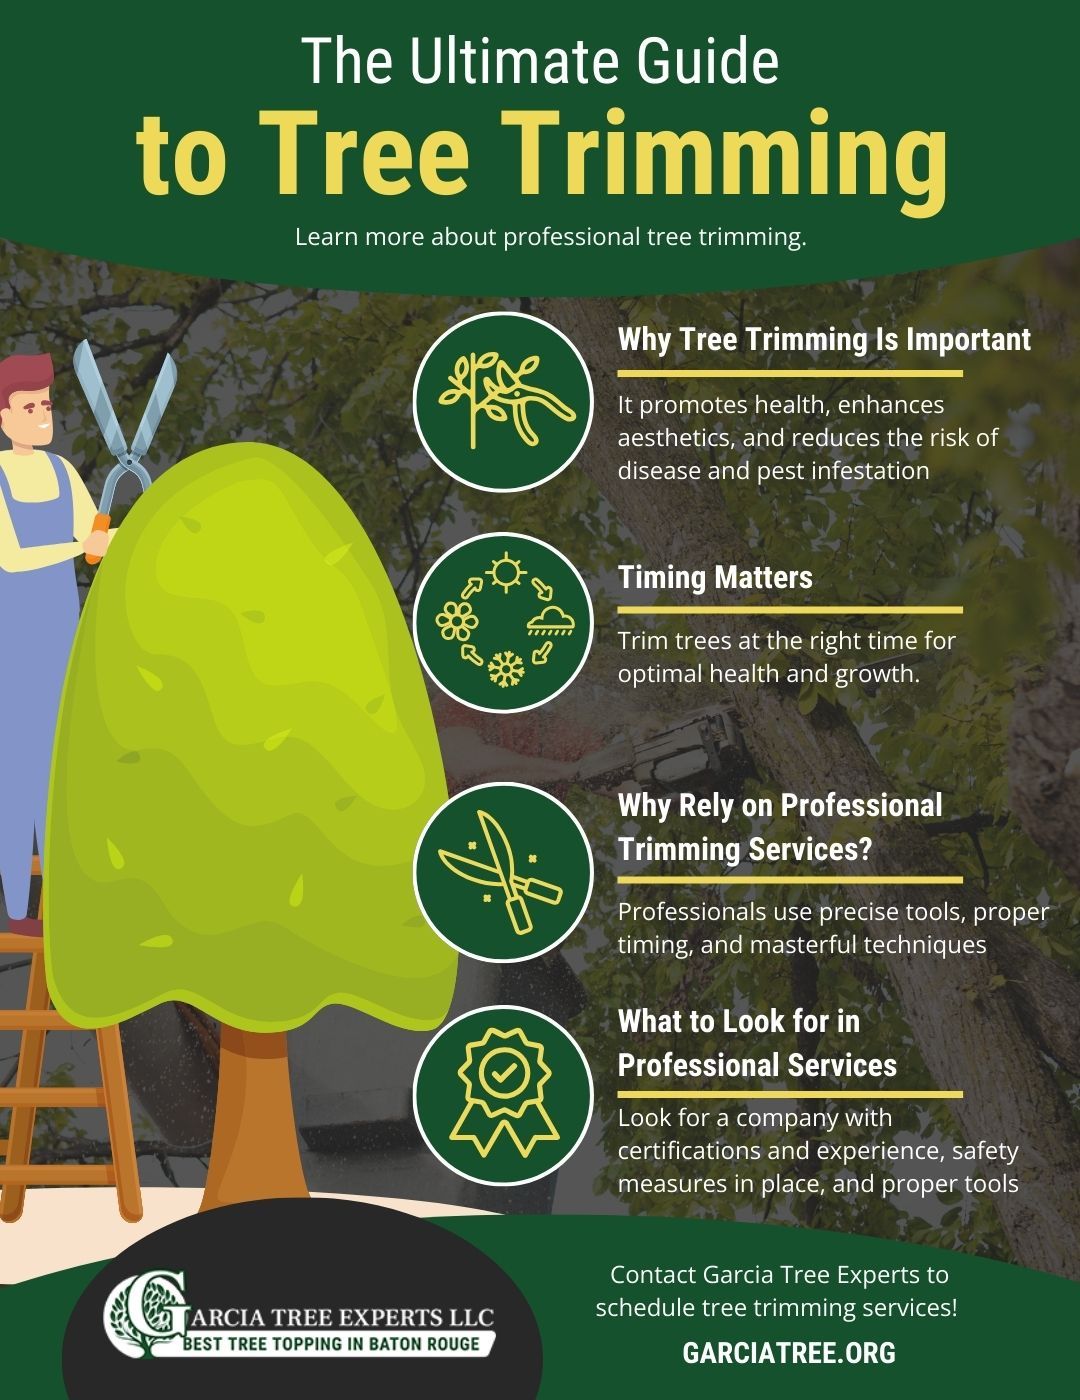 M35184  - Information Design - Infographic Template - The Ultimate Guide to Tree Trimming.jpg